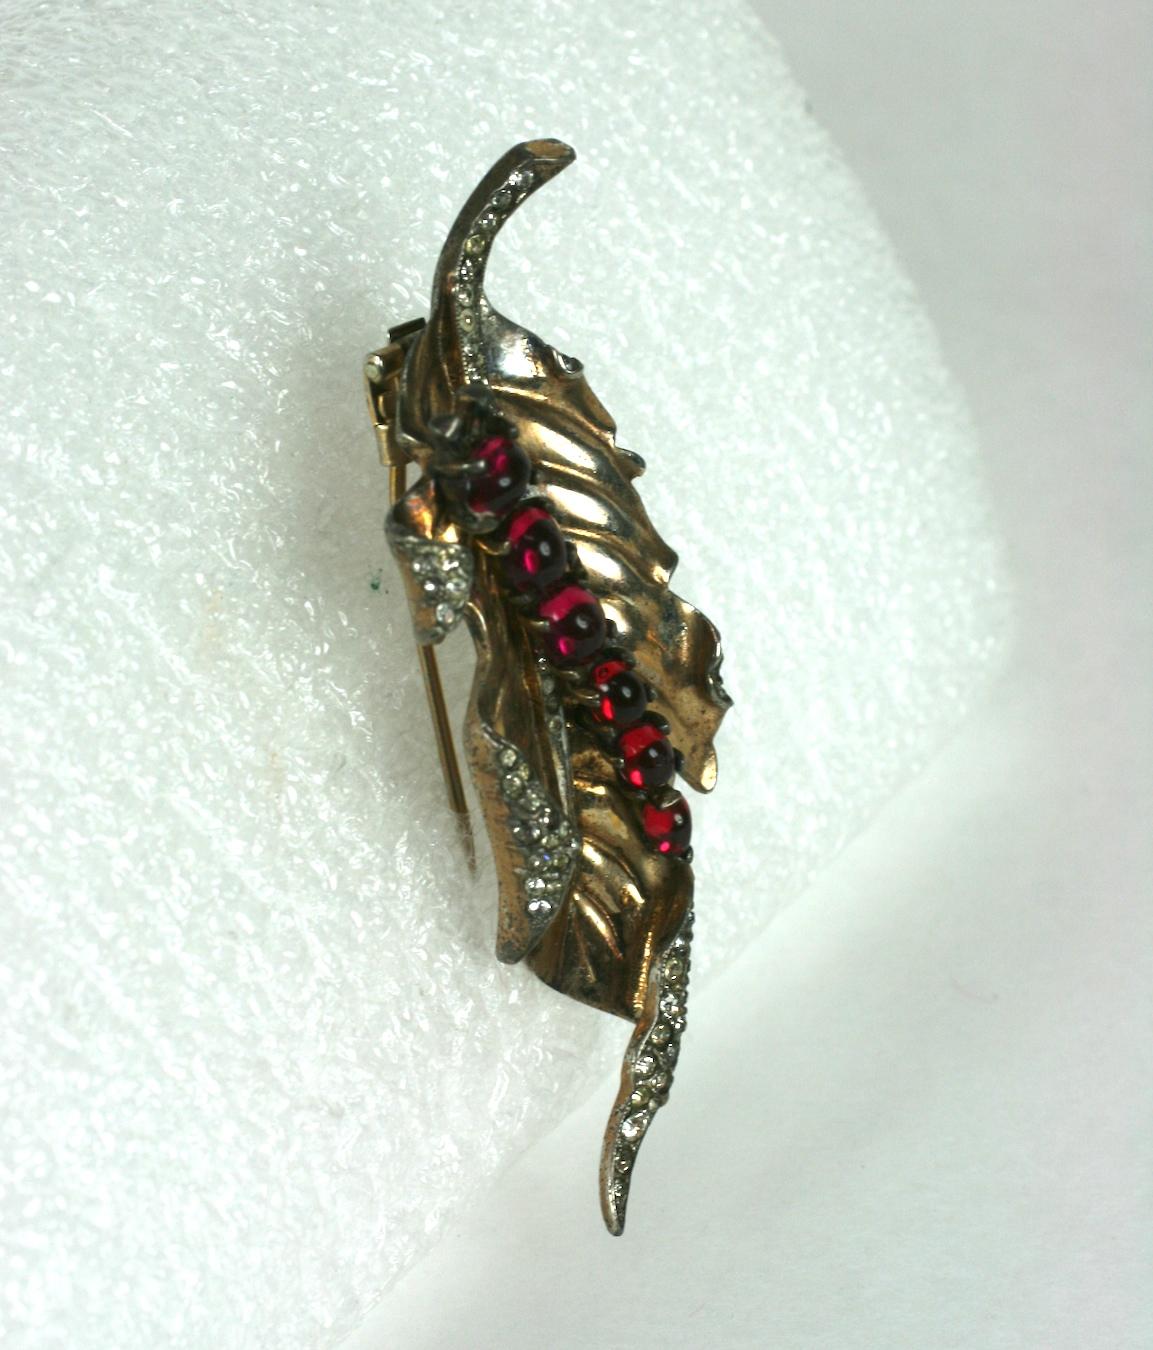 Charming Trifari Sterling Vermeil Caterpillar crawling on Leaf clip from the early 1940's.  A curled leaf with pink gold wash has an applied caterpillar in faux ruby cabochons and baguettes. The leaf is further decorated with pave rhinestone